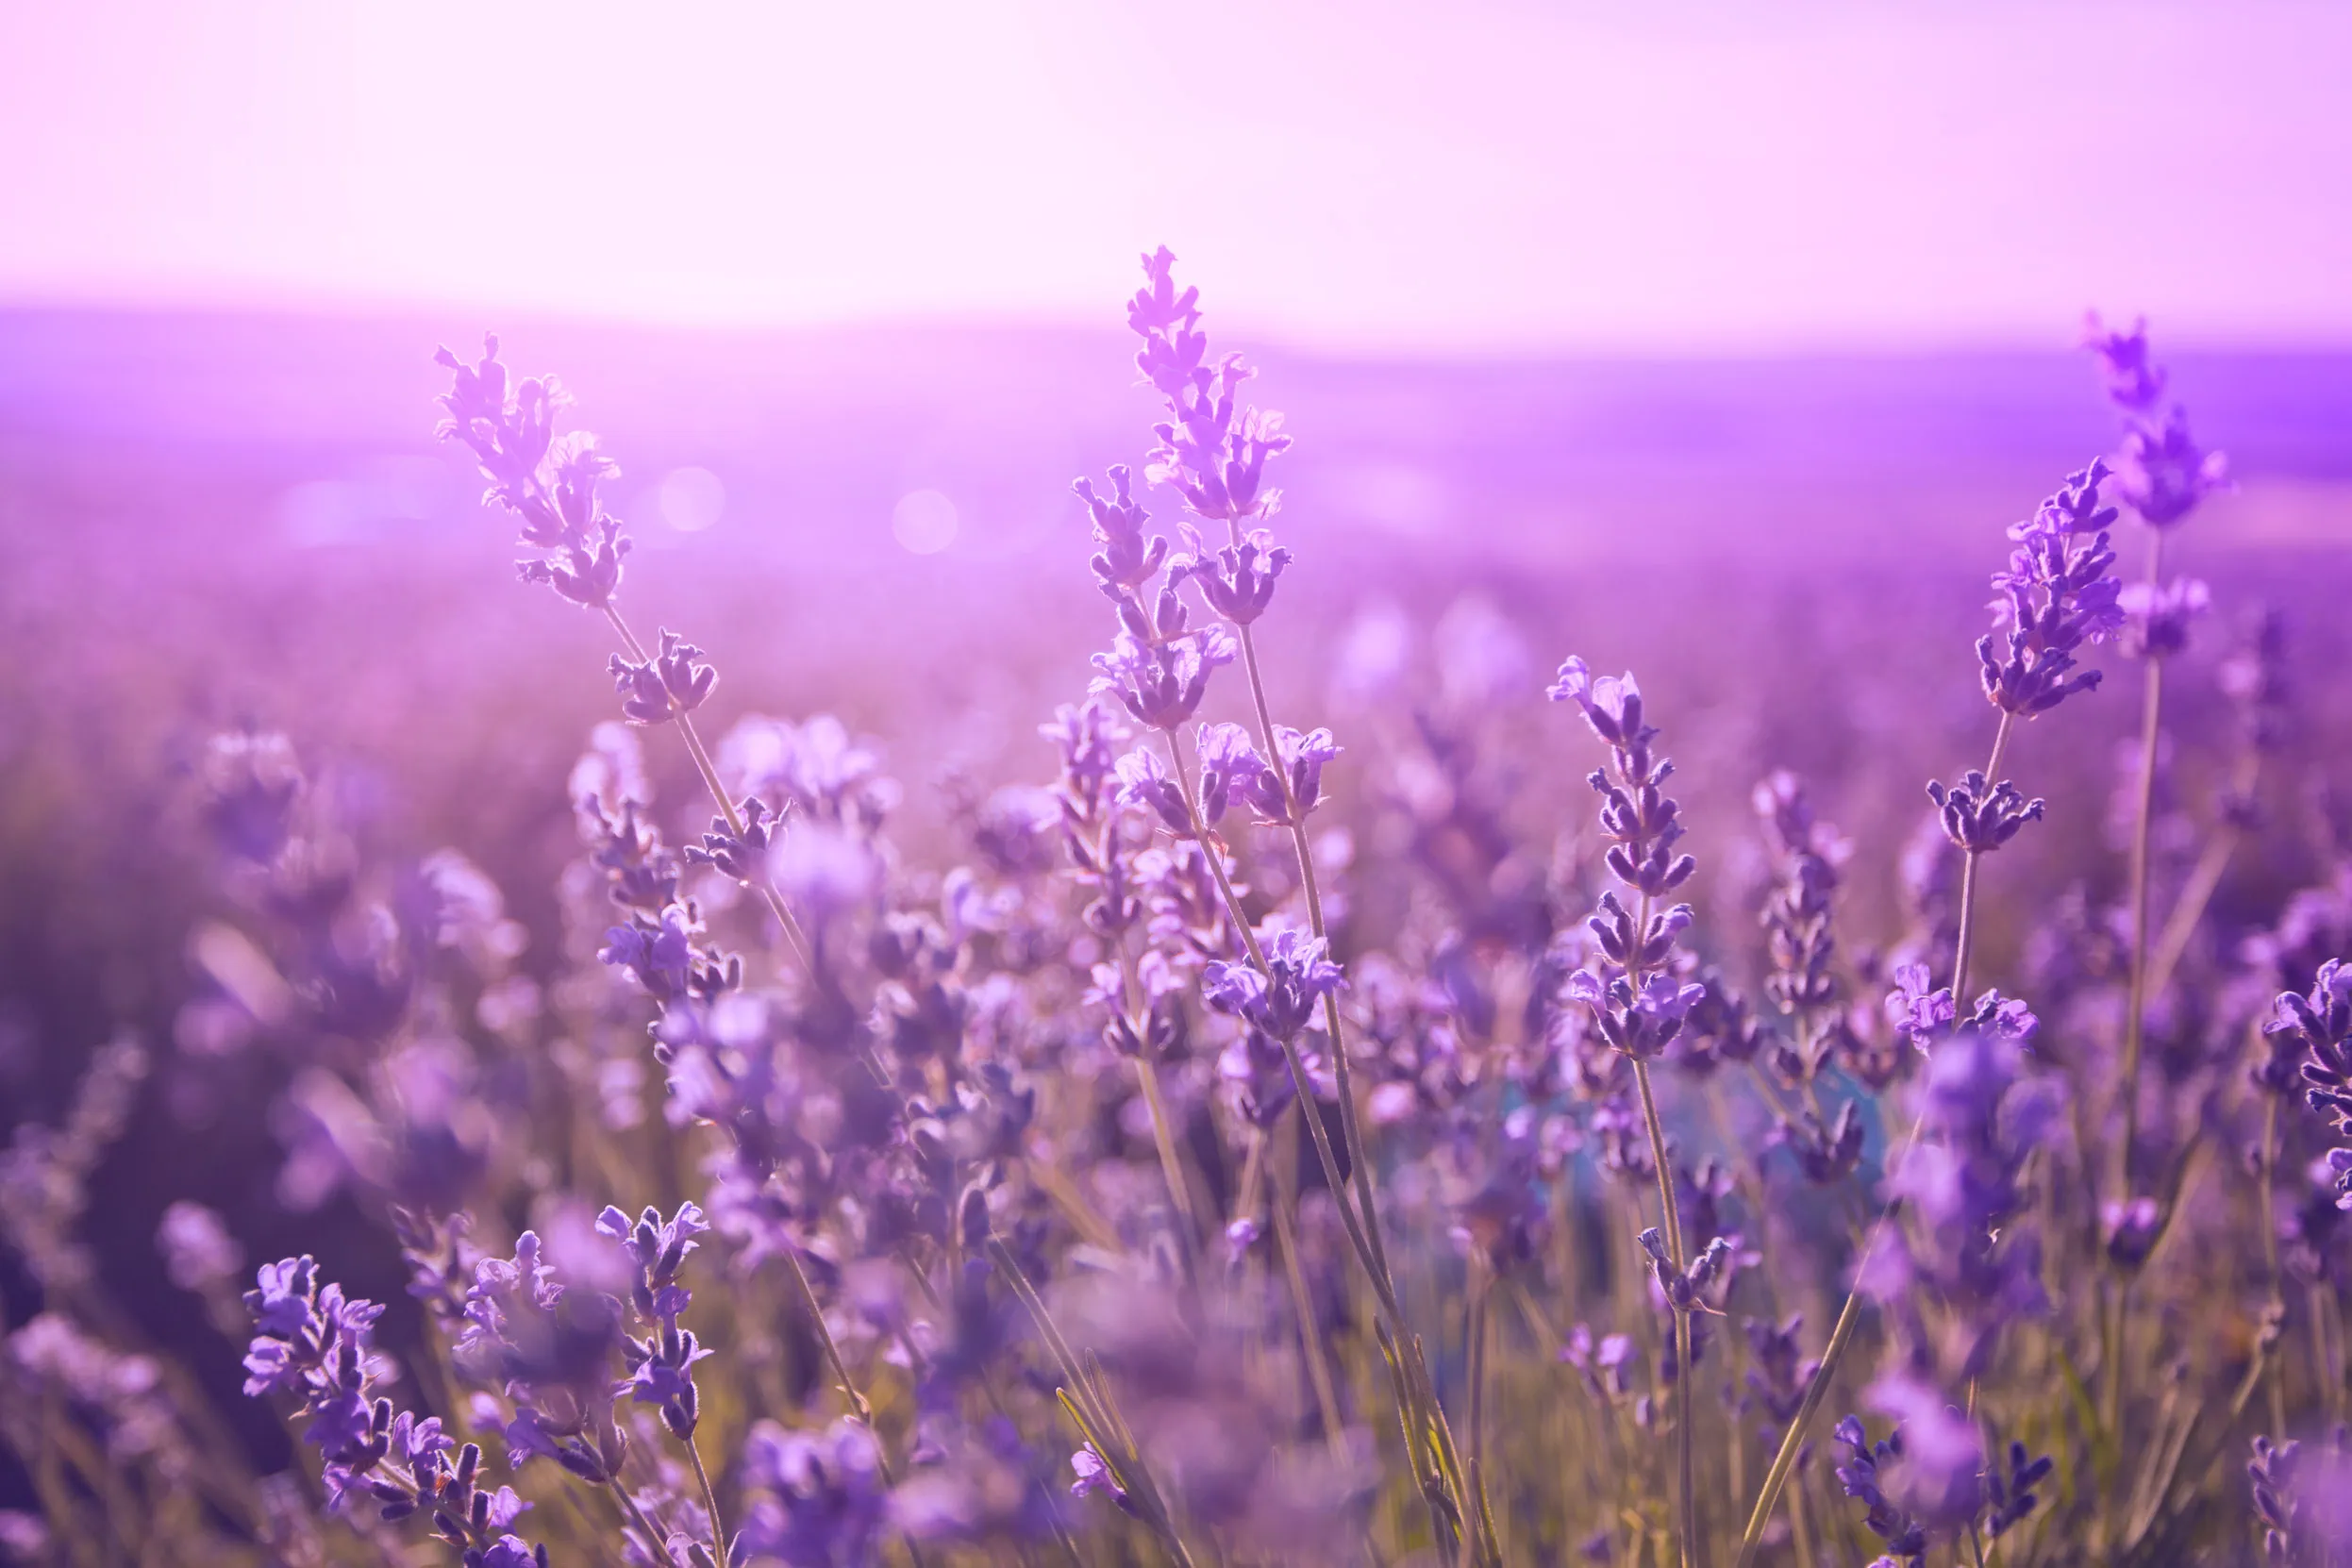 A field of lavender on a summer's day in a striking purple hue.